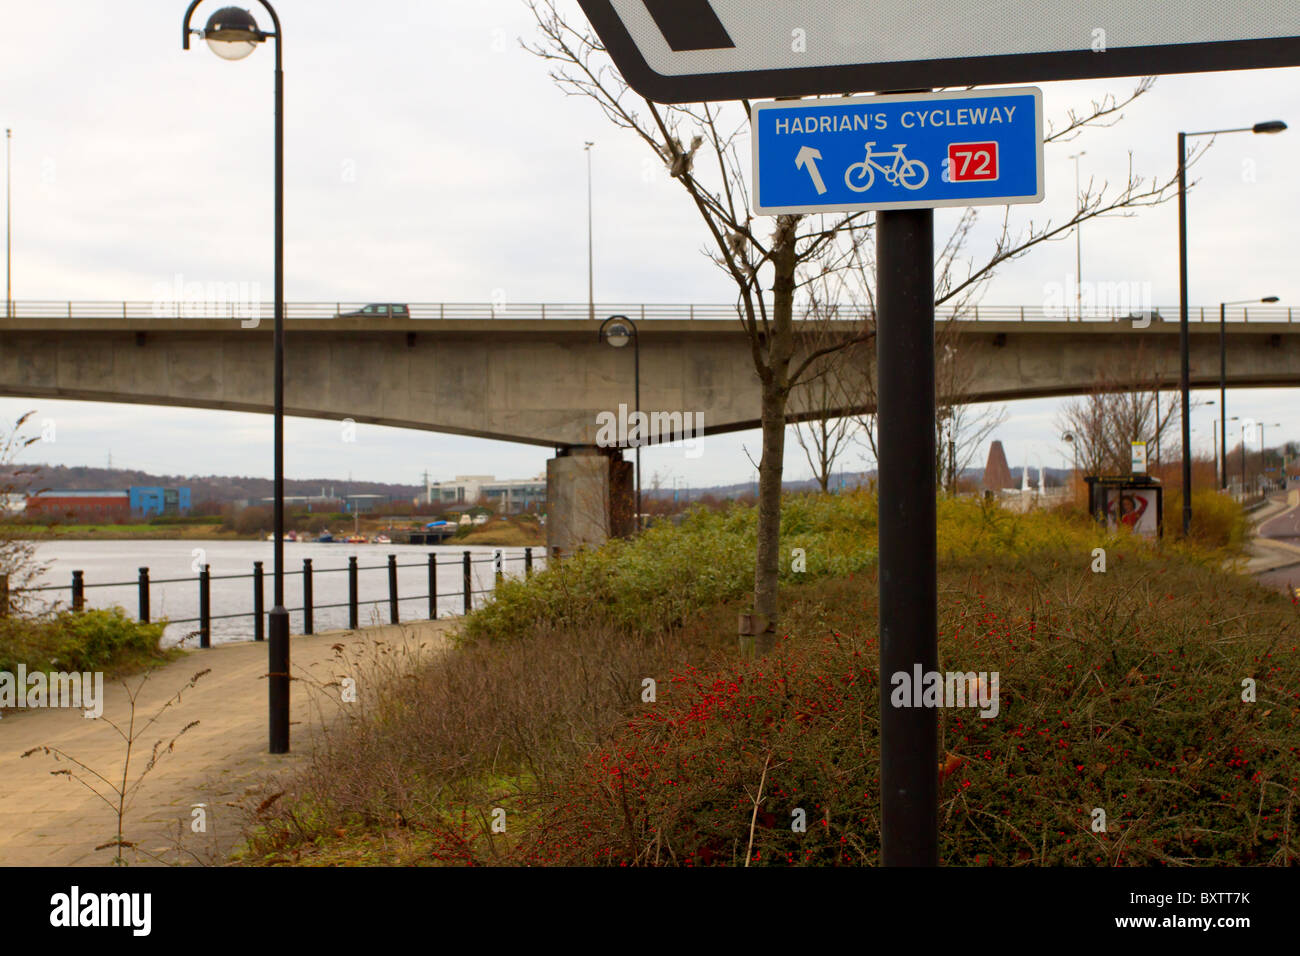 hadrians way Cycle Route information sign near scotswood bridge. Stock Photo